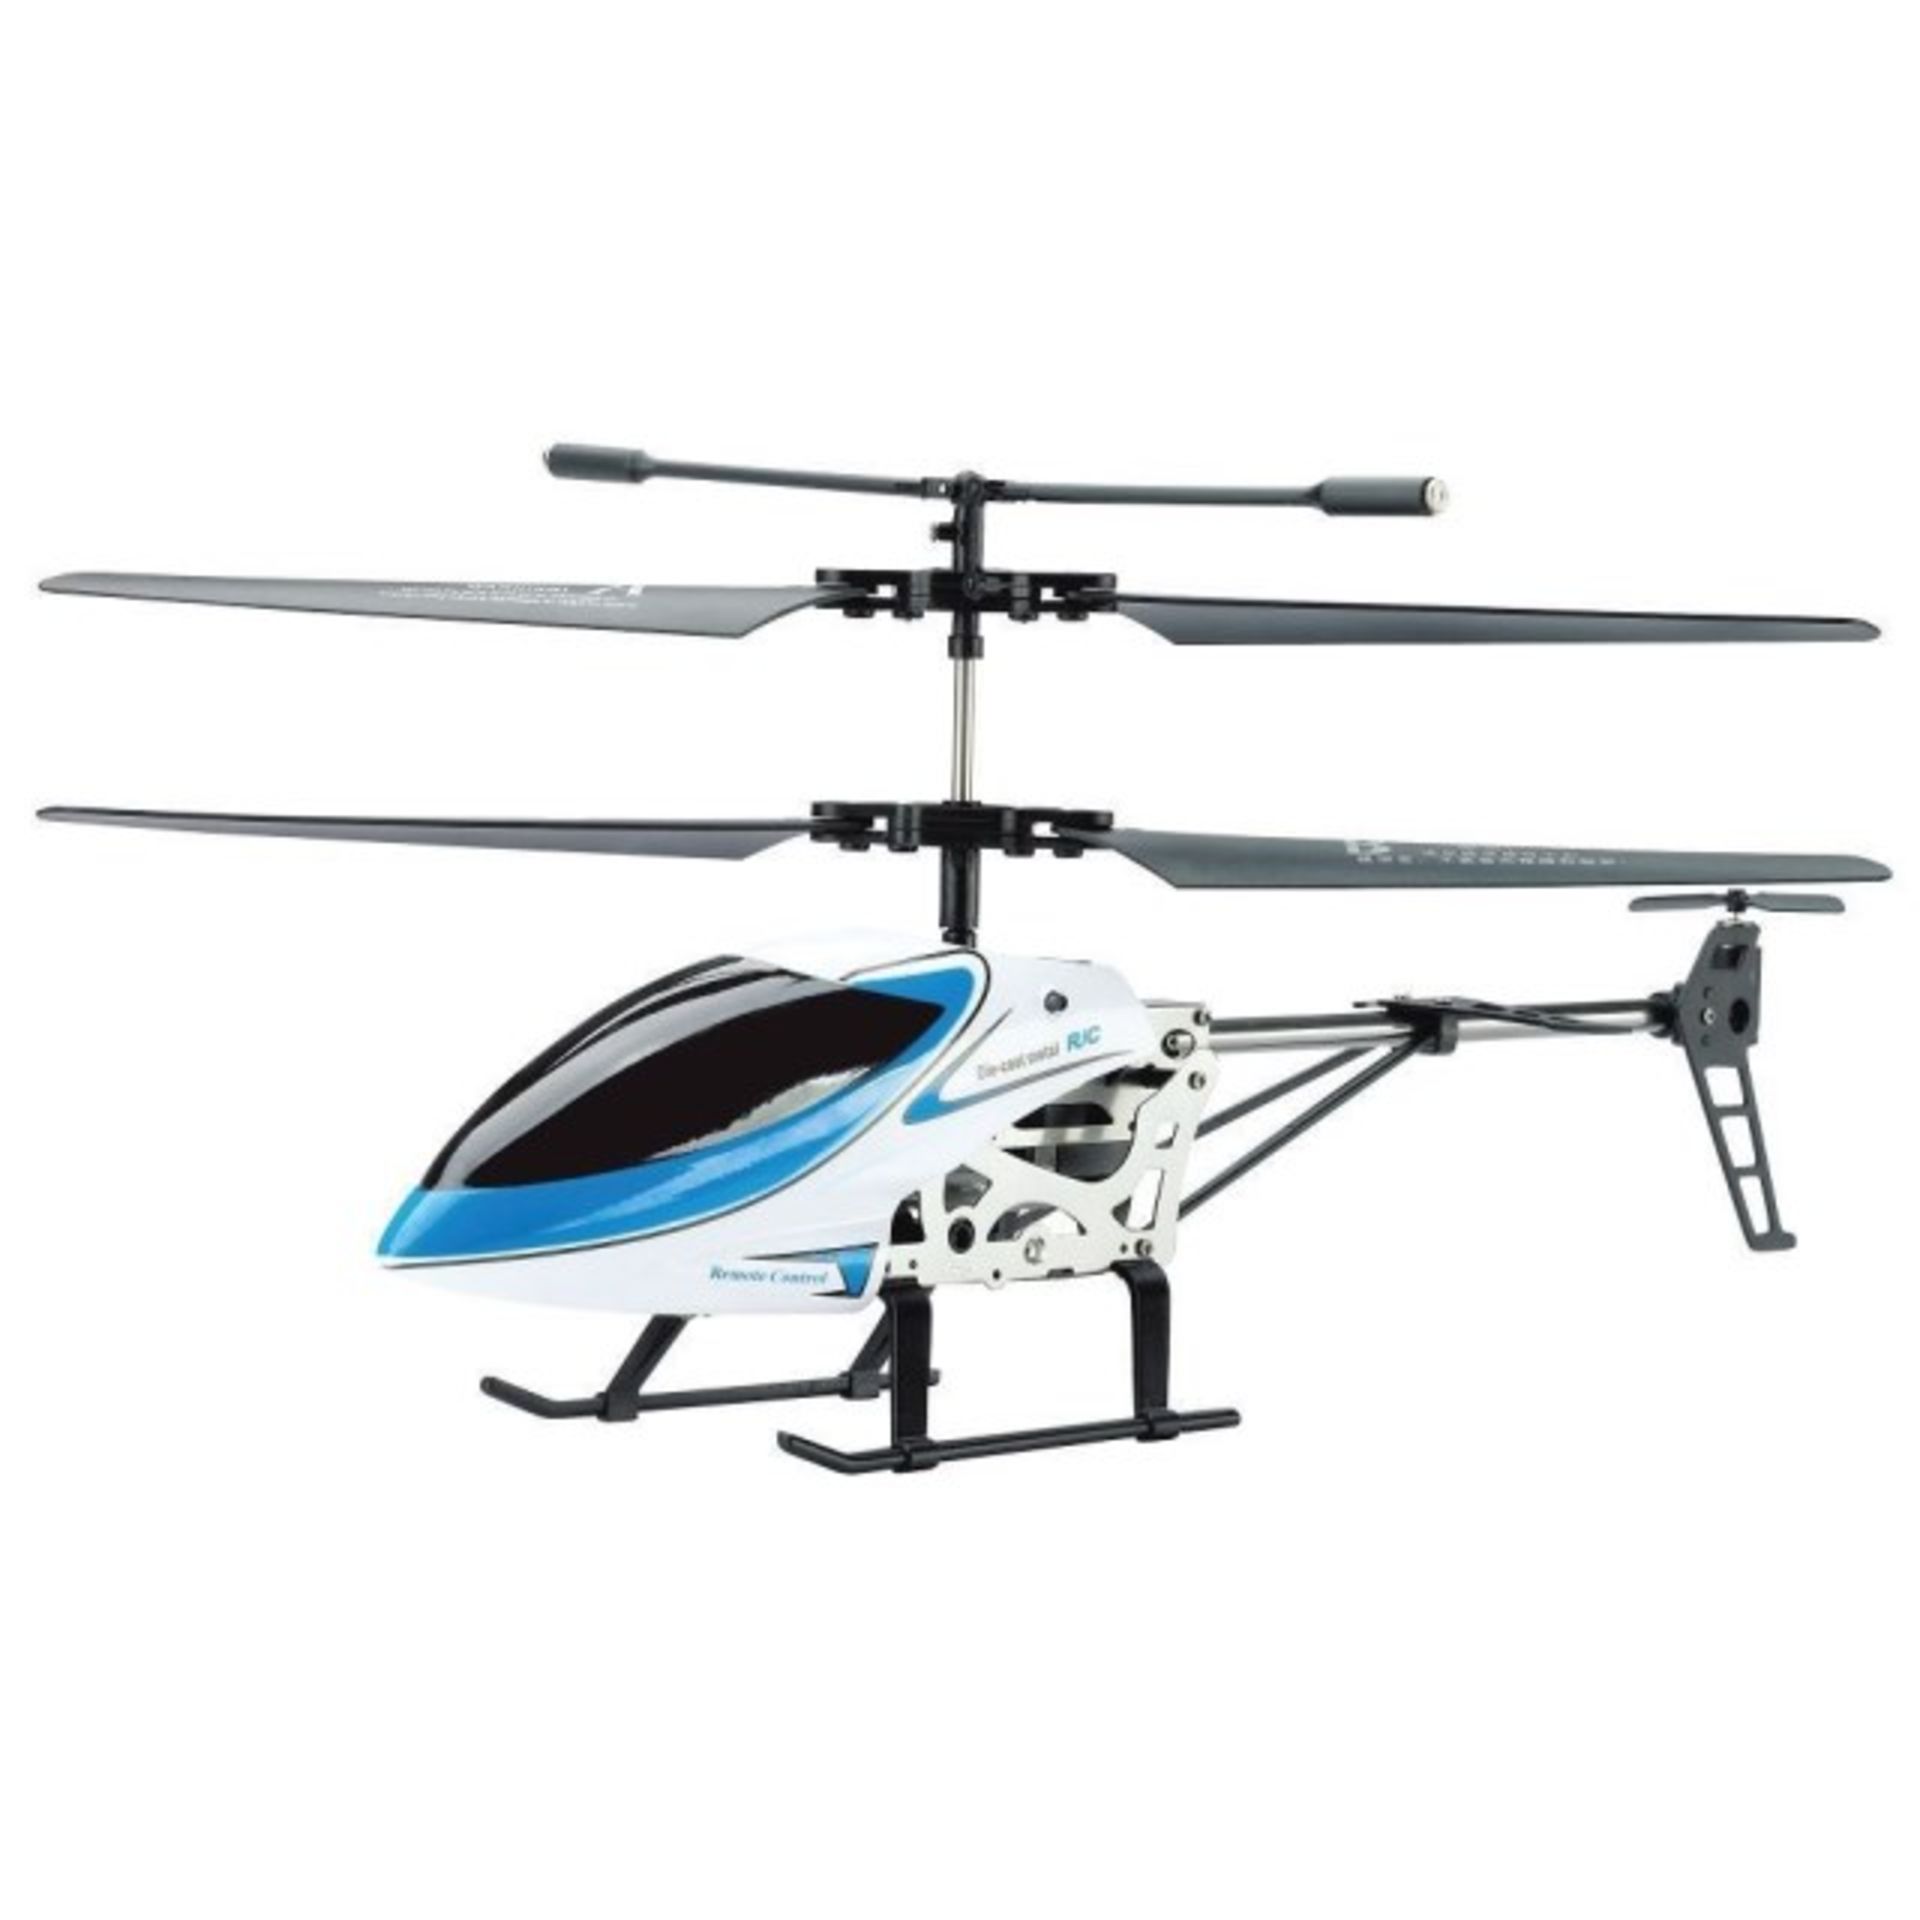 V *TRADE QTY* Brand New 3.5 Channel Infra-Red Control Helicopter Super Steady Rotor Blade System RRP